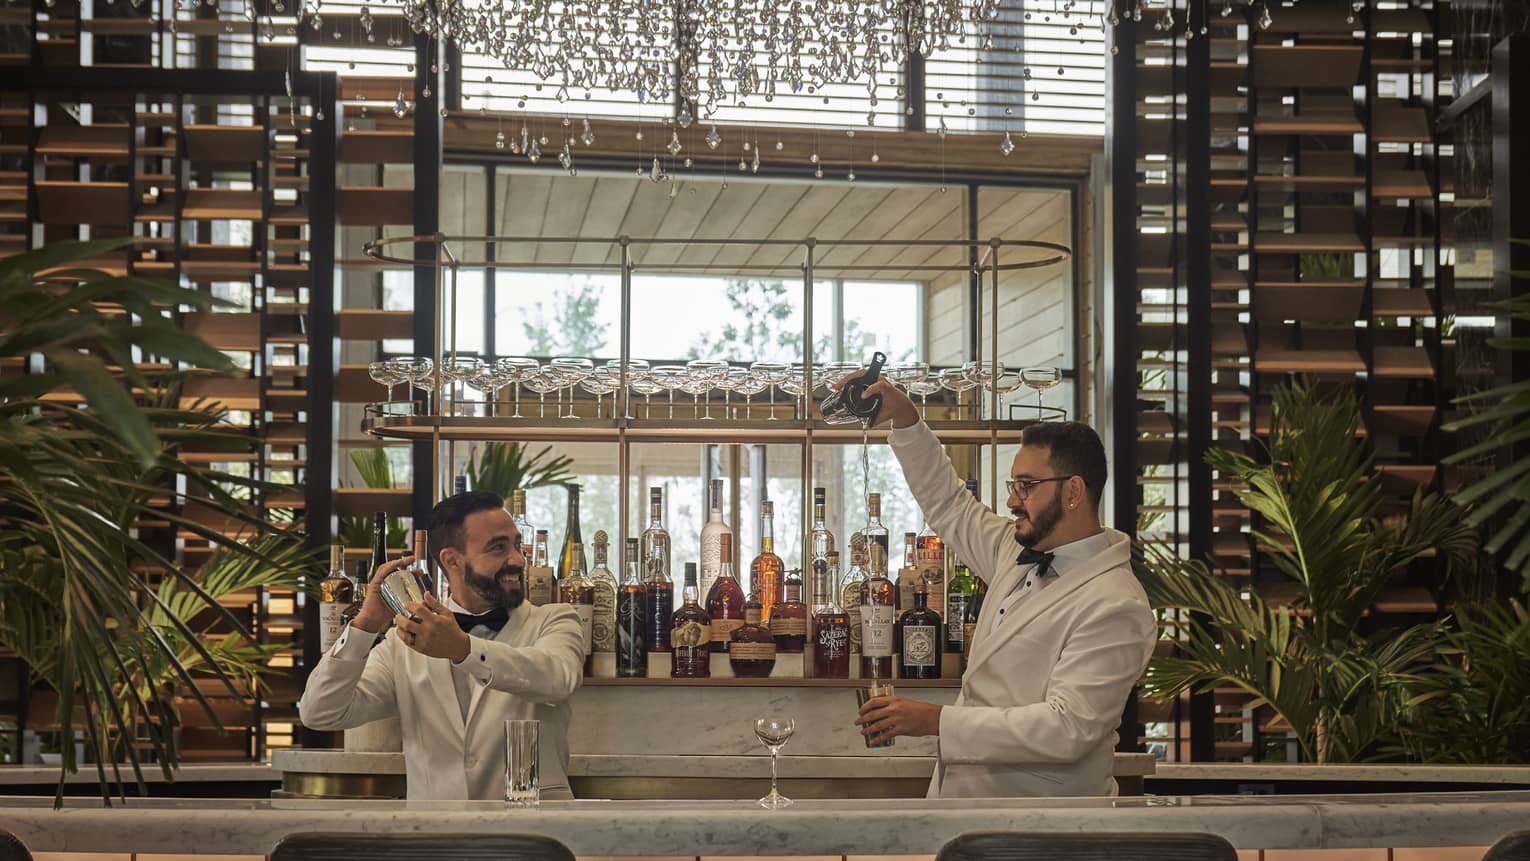 Two male bartenders clad in white prepare cocktails, liquor bottles on the bar behind them, the chandelier just visible at the top of the frame